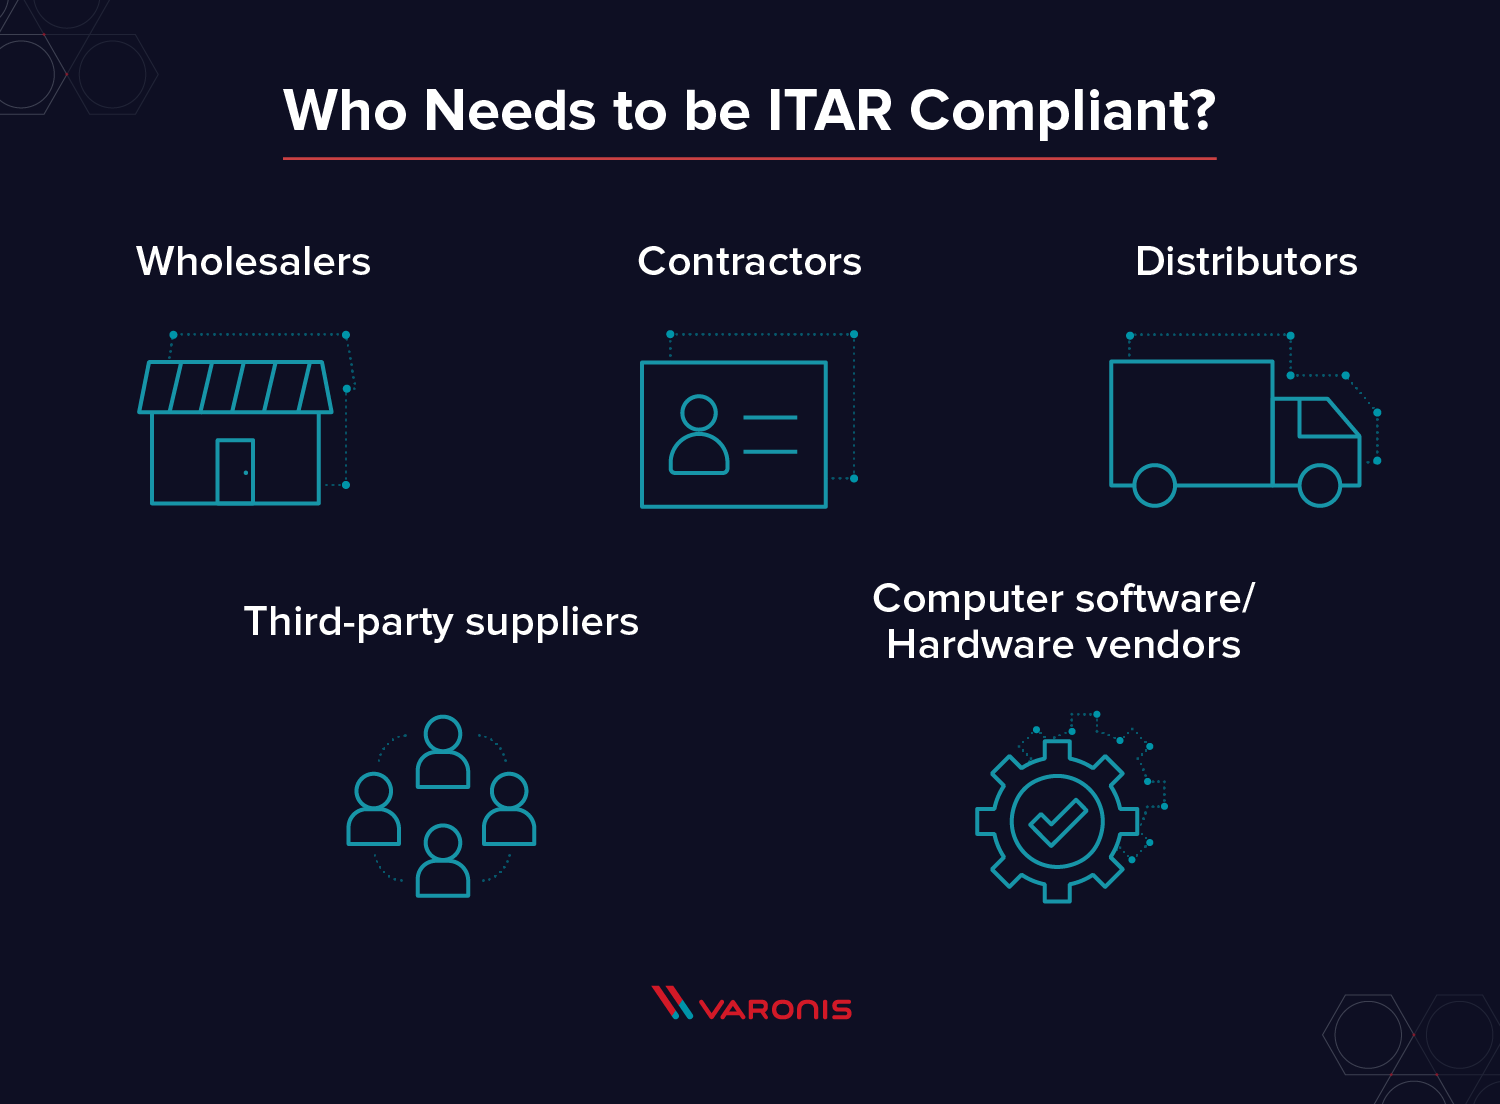 who needs to be ITAR compliant?